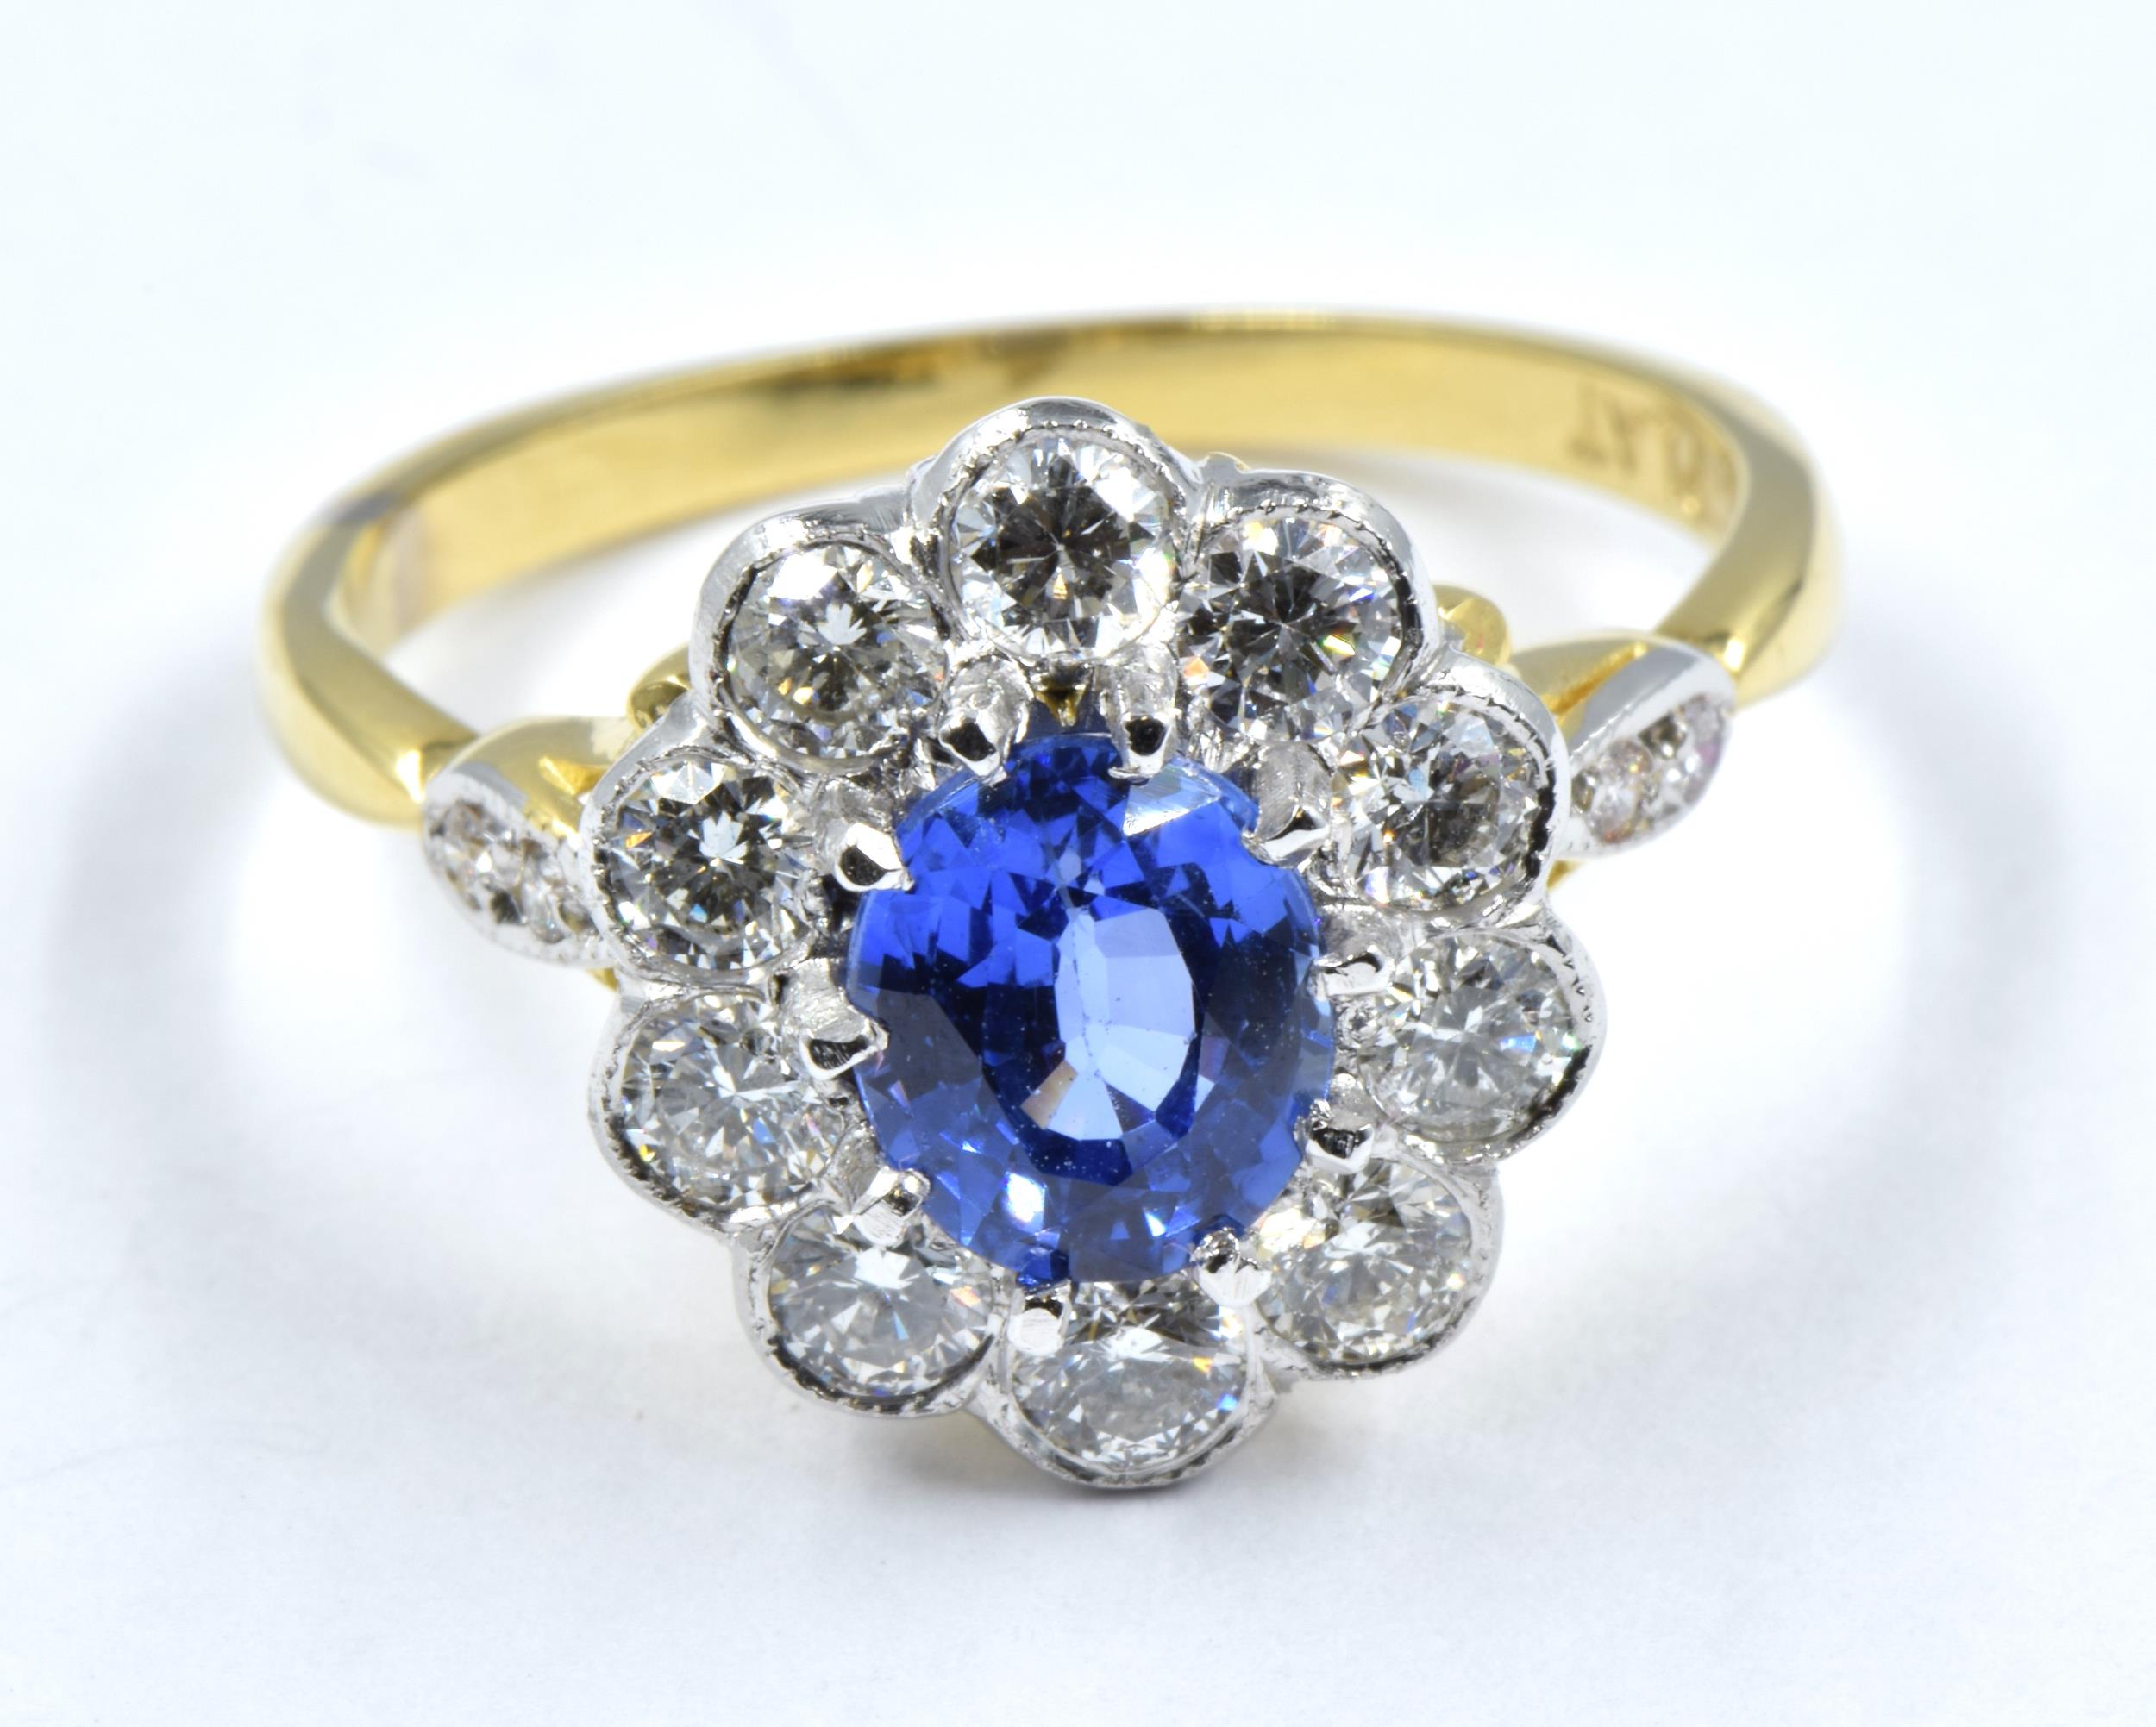 18ct yellow gold and platinum ring set with central oval sapphire surrounded by diamonds, size 'O'